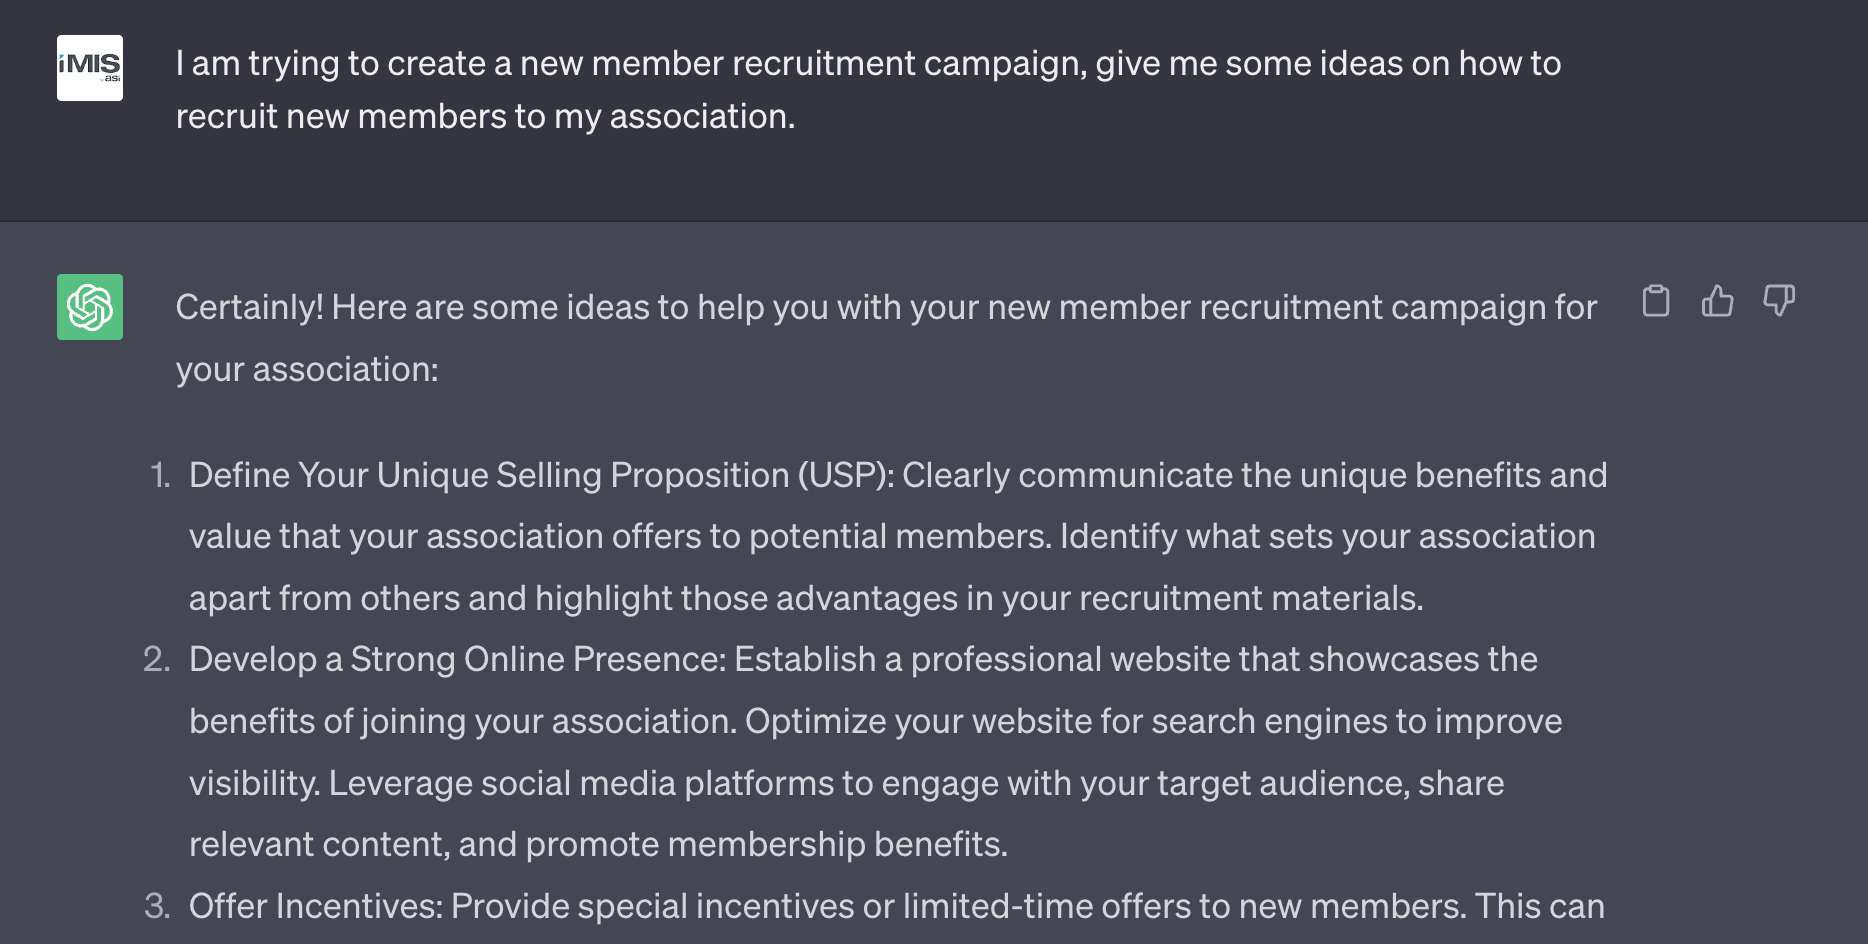 Prompt on ChatGPT: I am trying to create a new member recruitment campaign, give me some ideas on how to recruit new members to my association.